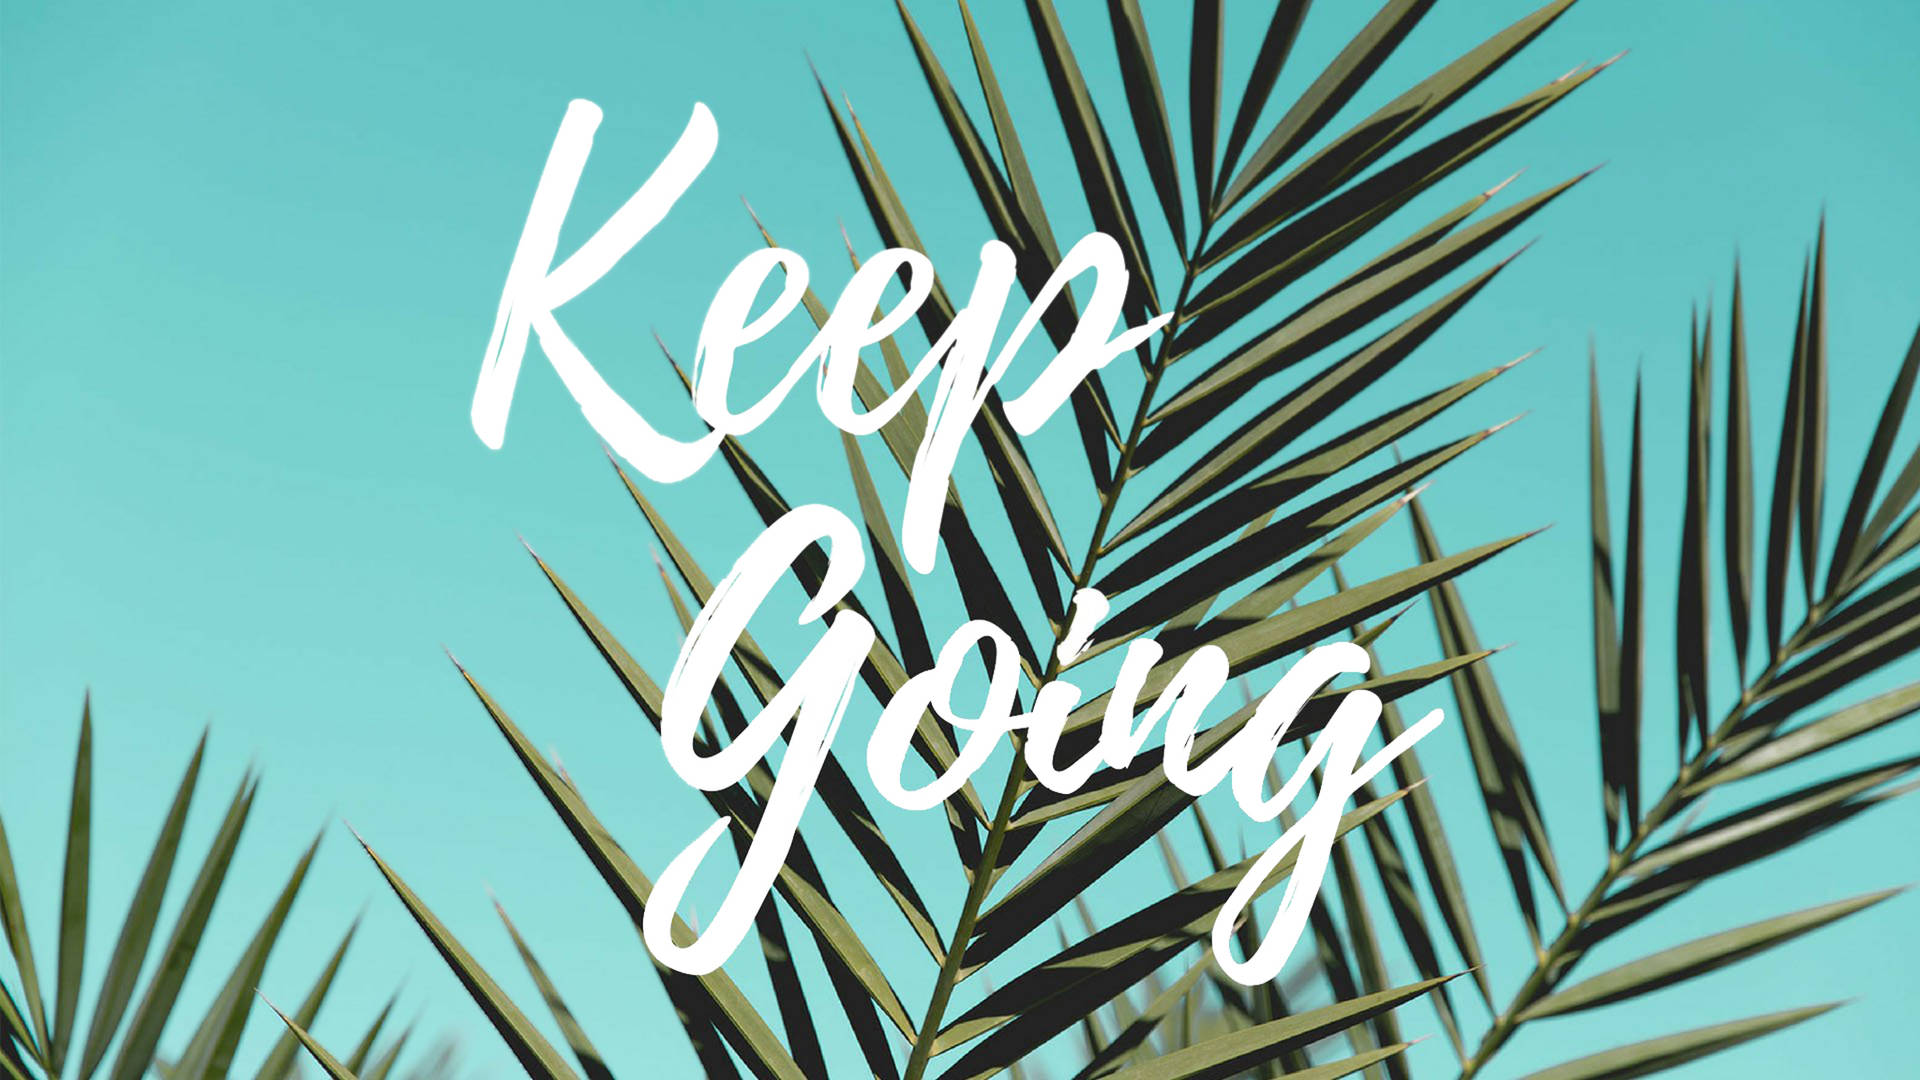 Inspiring Aesthetic Desktop Wallpaper With Keep Going Quote Background